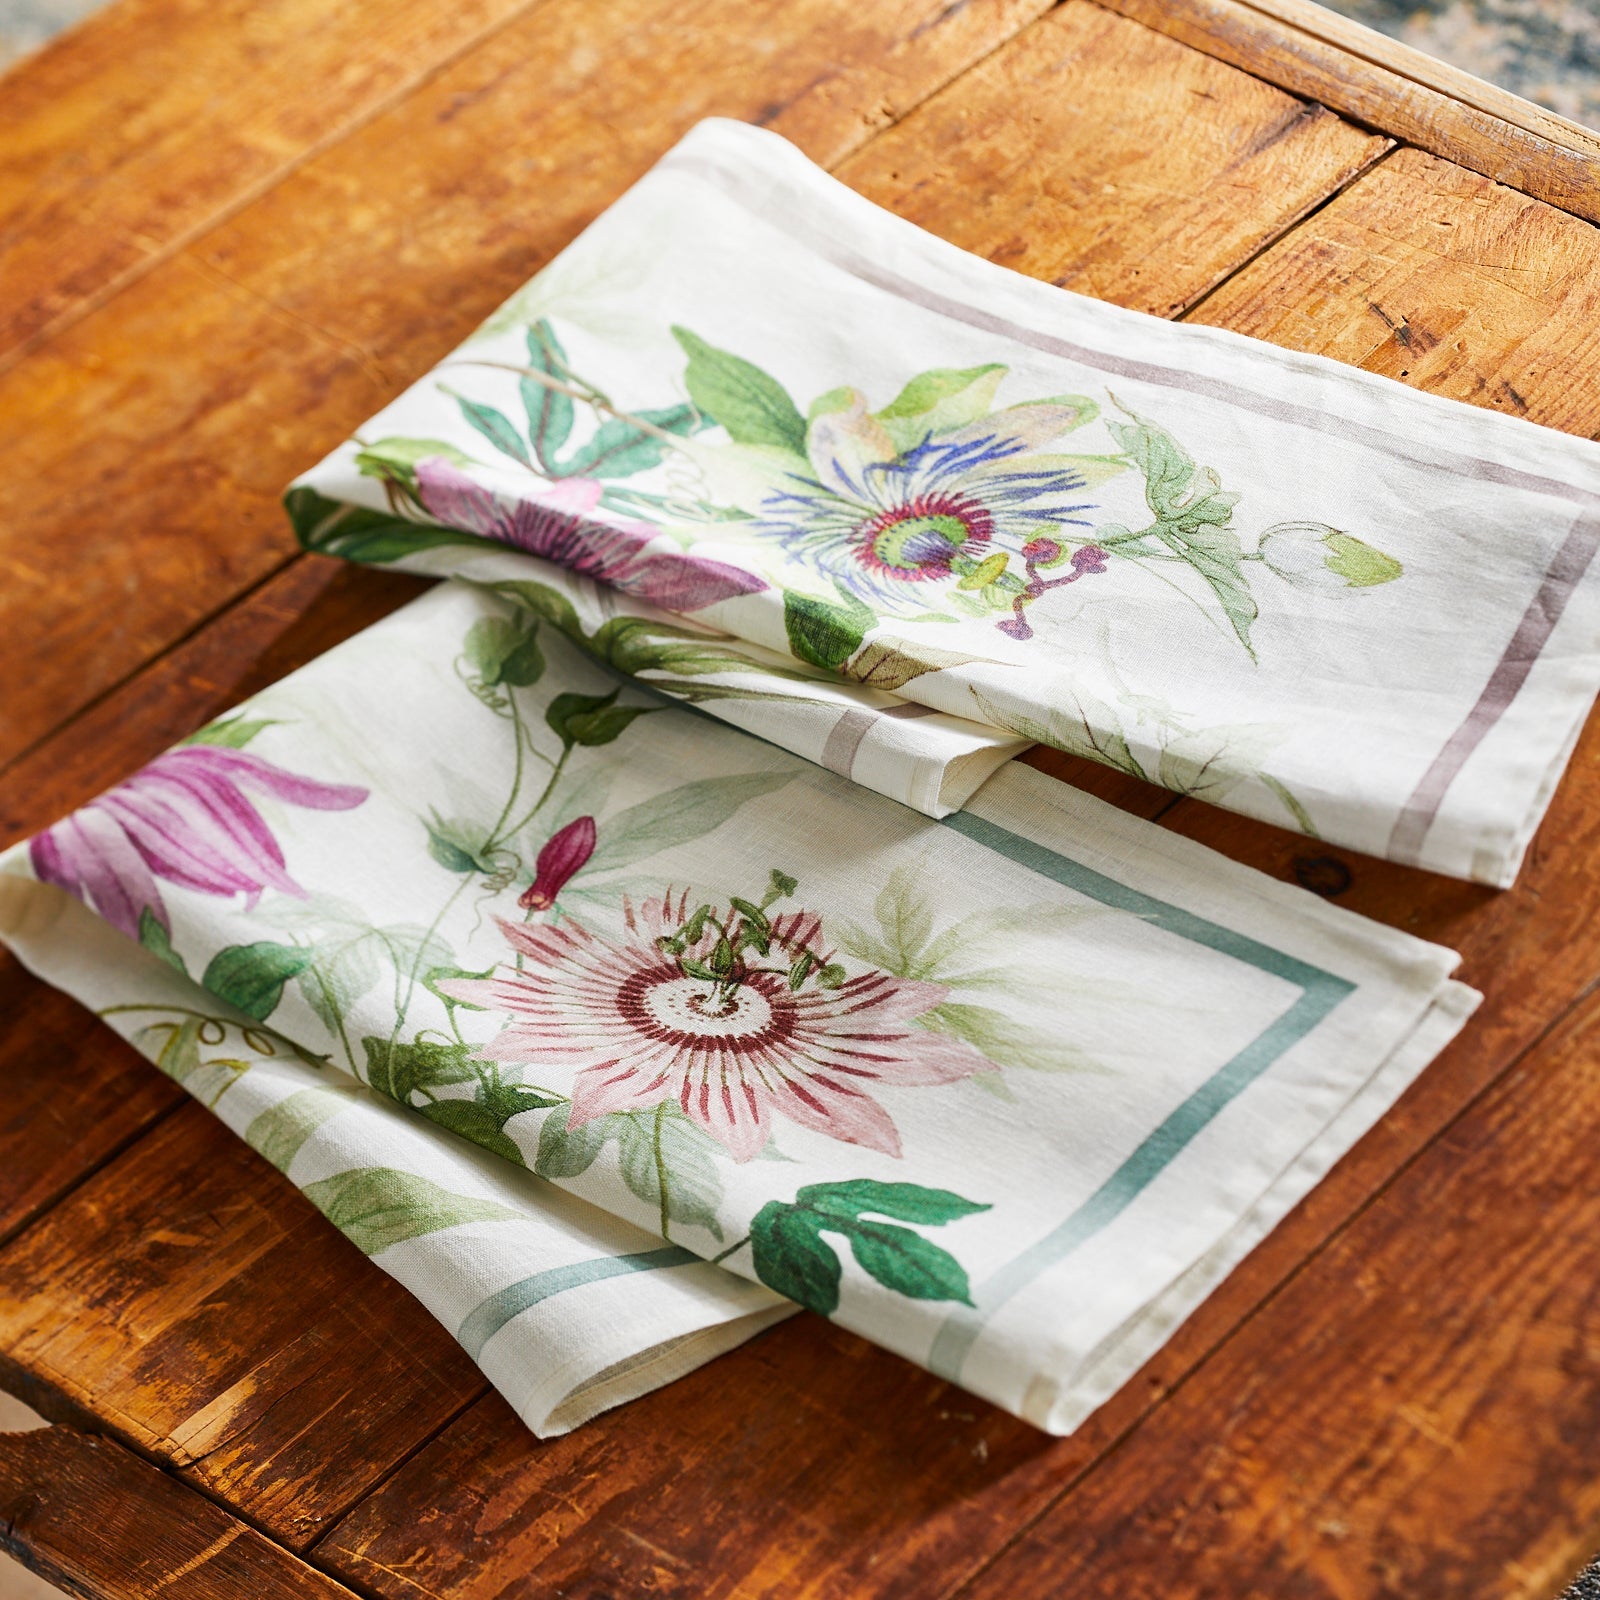 Passionflowers depicted in vivid watercolors on this set of 2 kitchen towels, made of 100% Italian linen, sold by Caskata